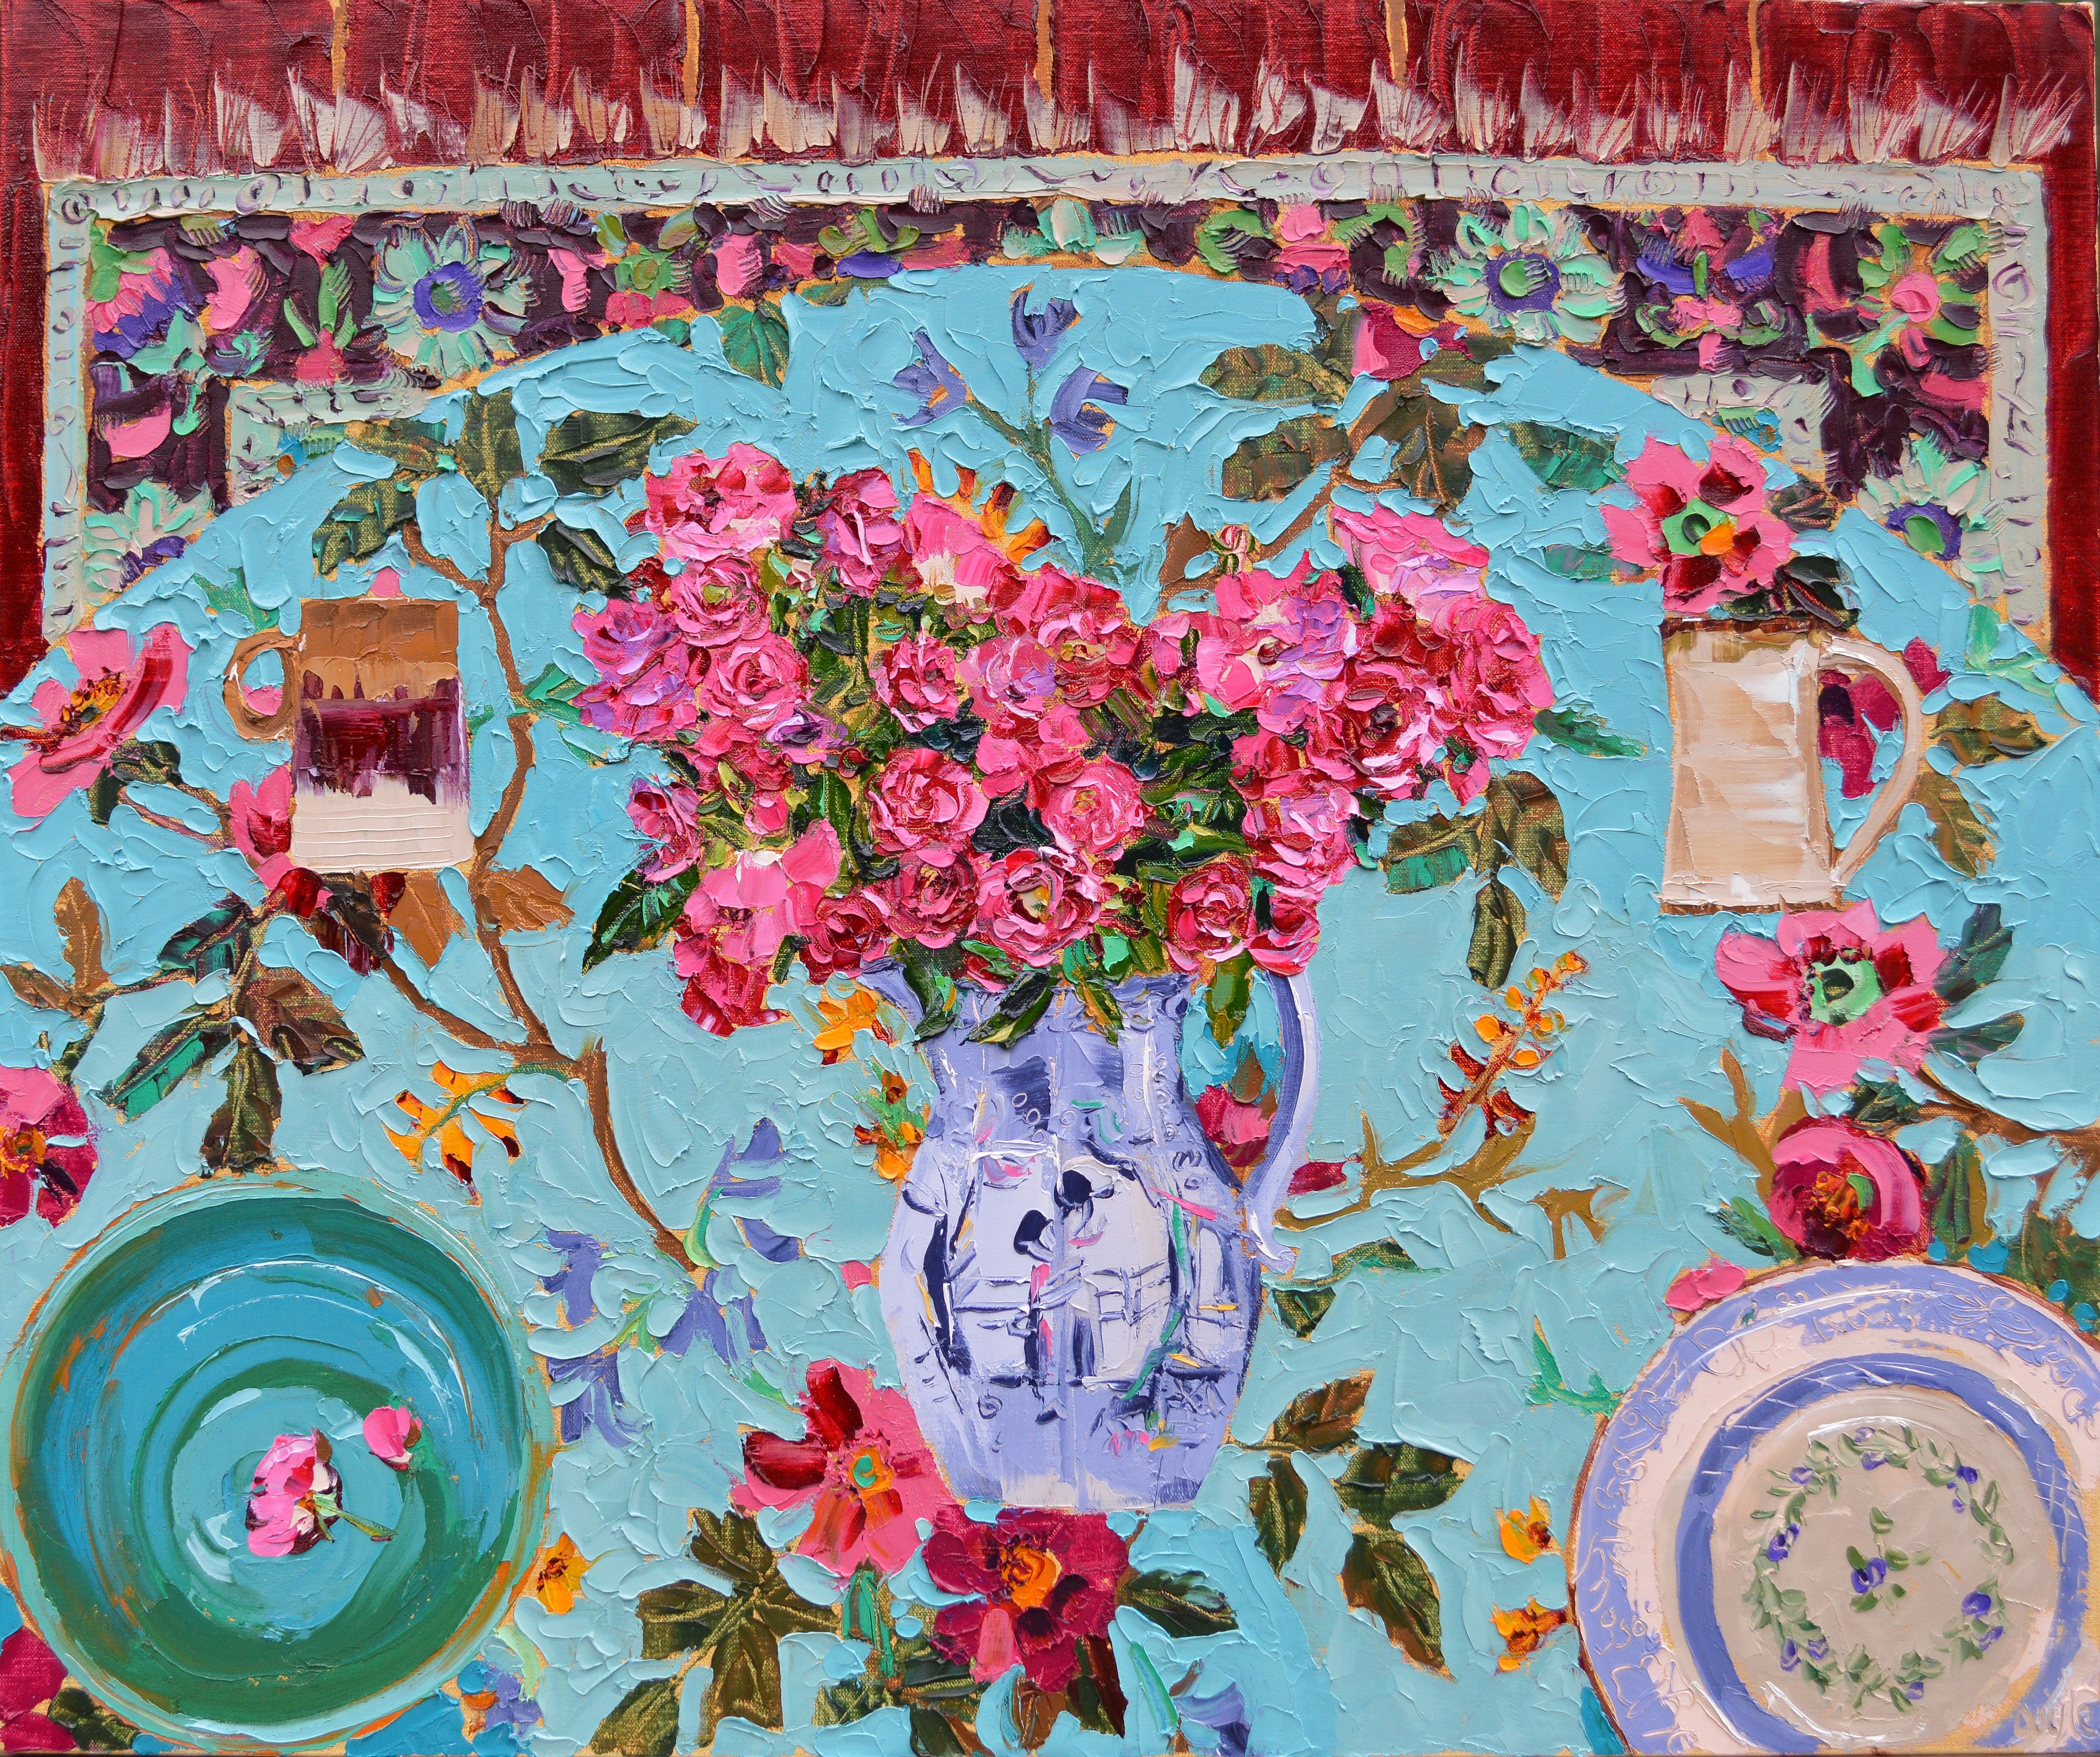 Still life with Roses by Lucy Doyle